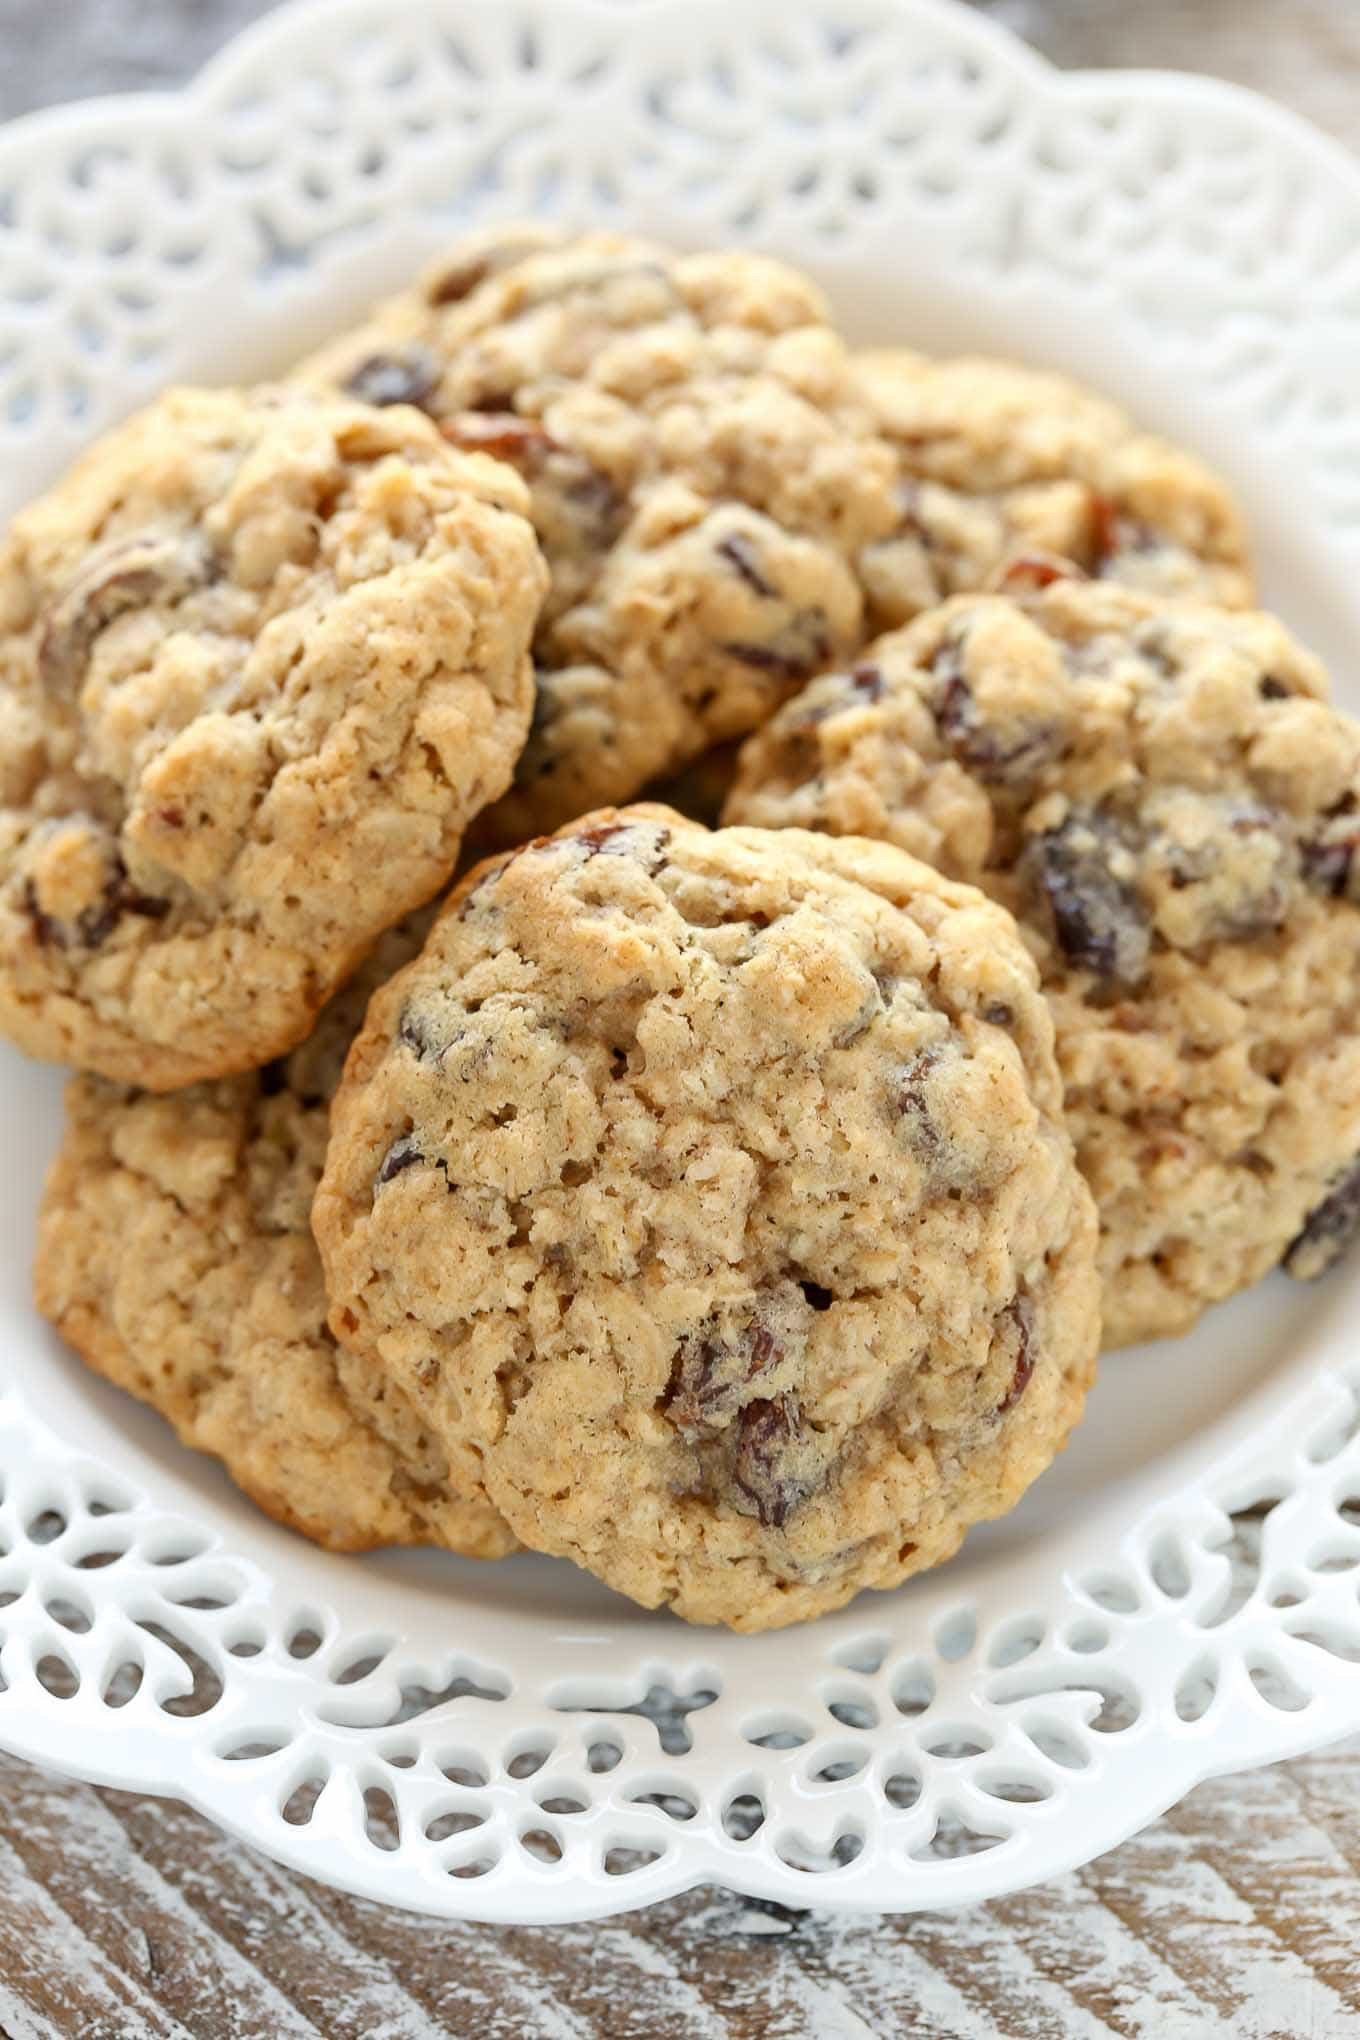 Oatmeal Raisin Cookies Recipe
 Soft and Chewy Oatmeal Raisin Cookies